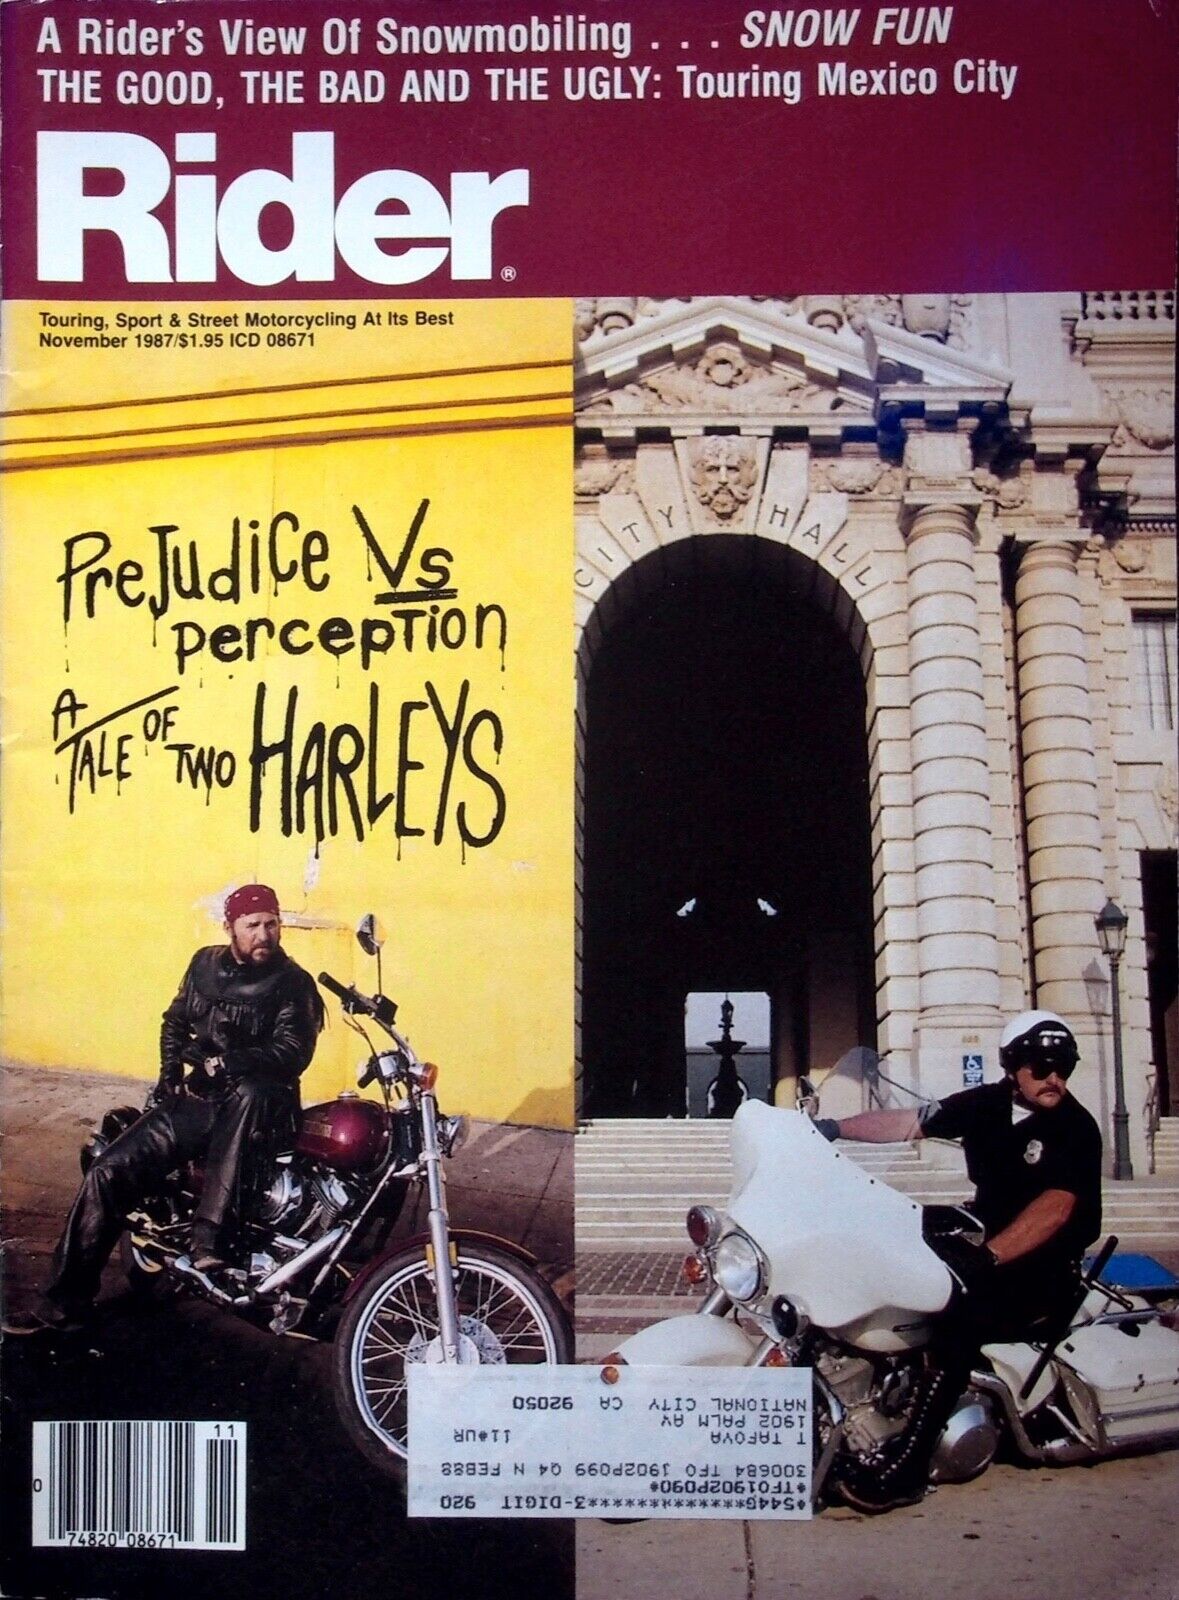 A TALE OF TWO HARLEYS; TOURING MEXICO CITY - RIDER MAGAZINE, NOV 1987